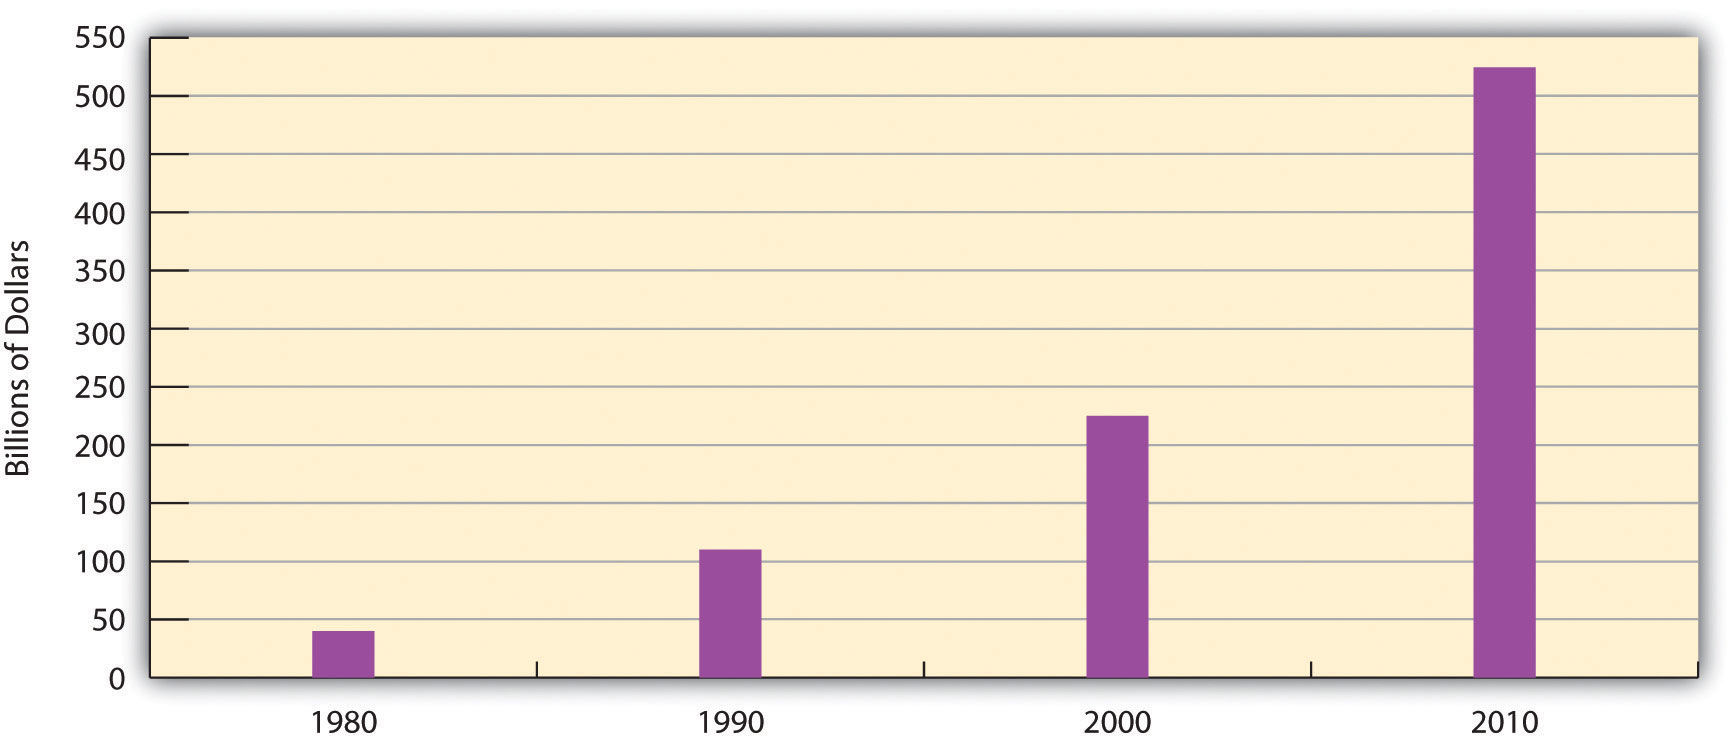 A graph of Medicare Expenditures from 1980-2010. They dramatically increase from 1980 to 2010